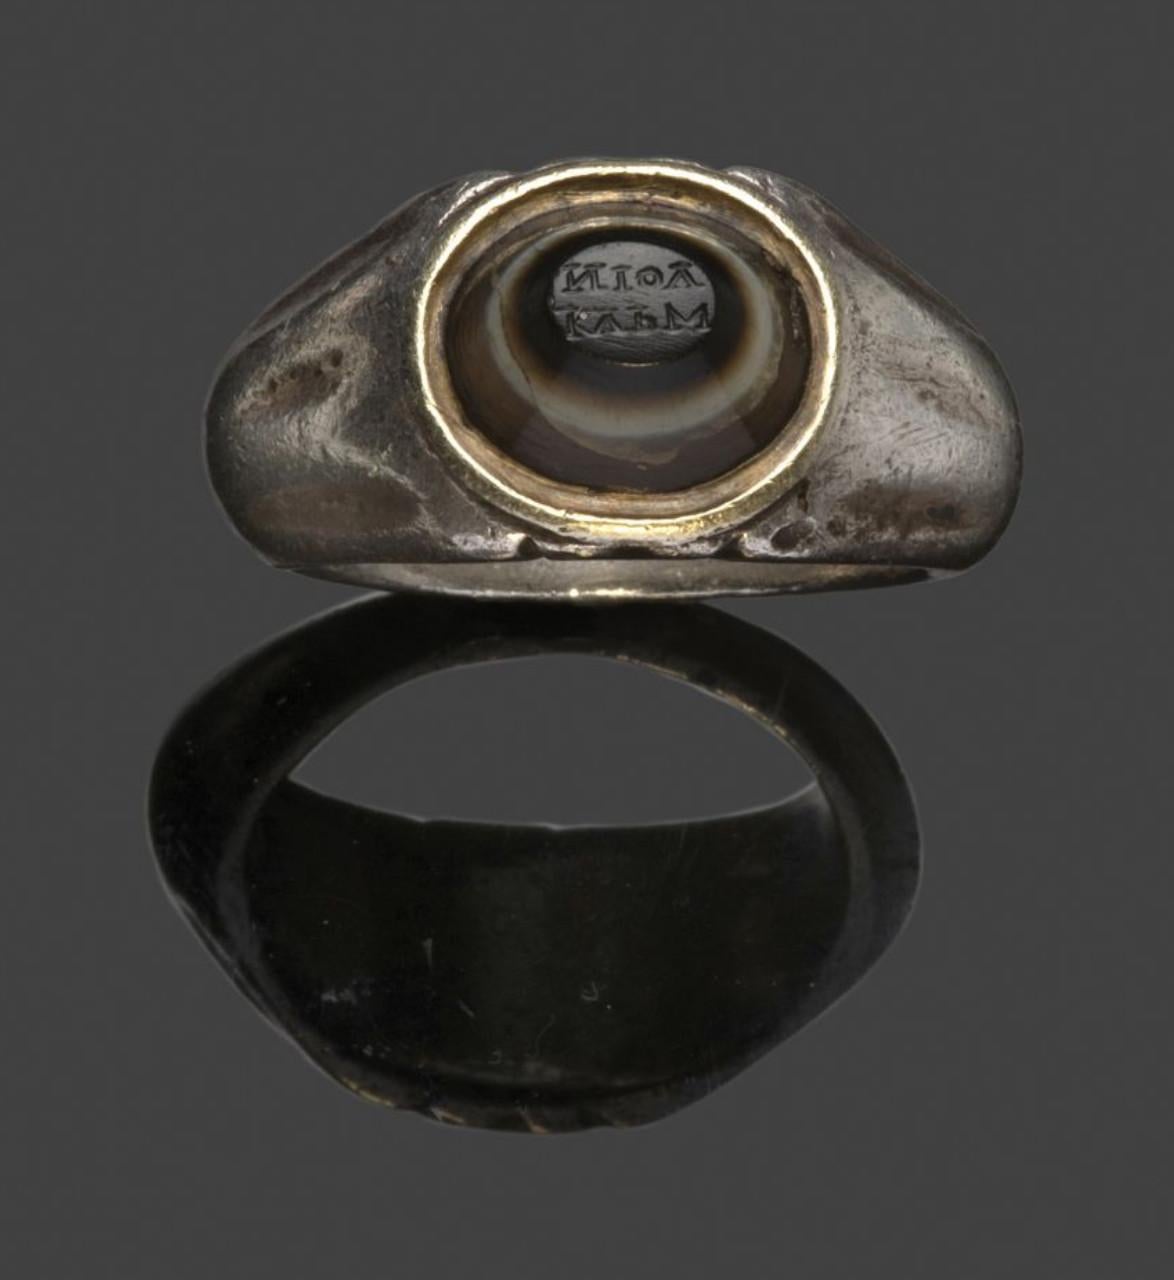 An ancient eye bead in later ca 1820 silver setting. Eye beads were as apotropaic “medicine�” or protective amulets against the evil eye.
Three layered truncated conical stone, with a small retrograde inscription.
Roman art. 1st - 3rd century AD
10 x